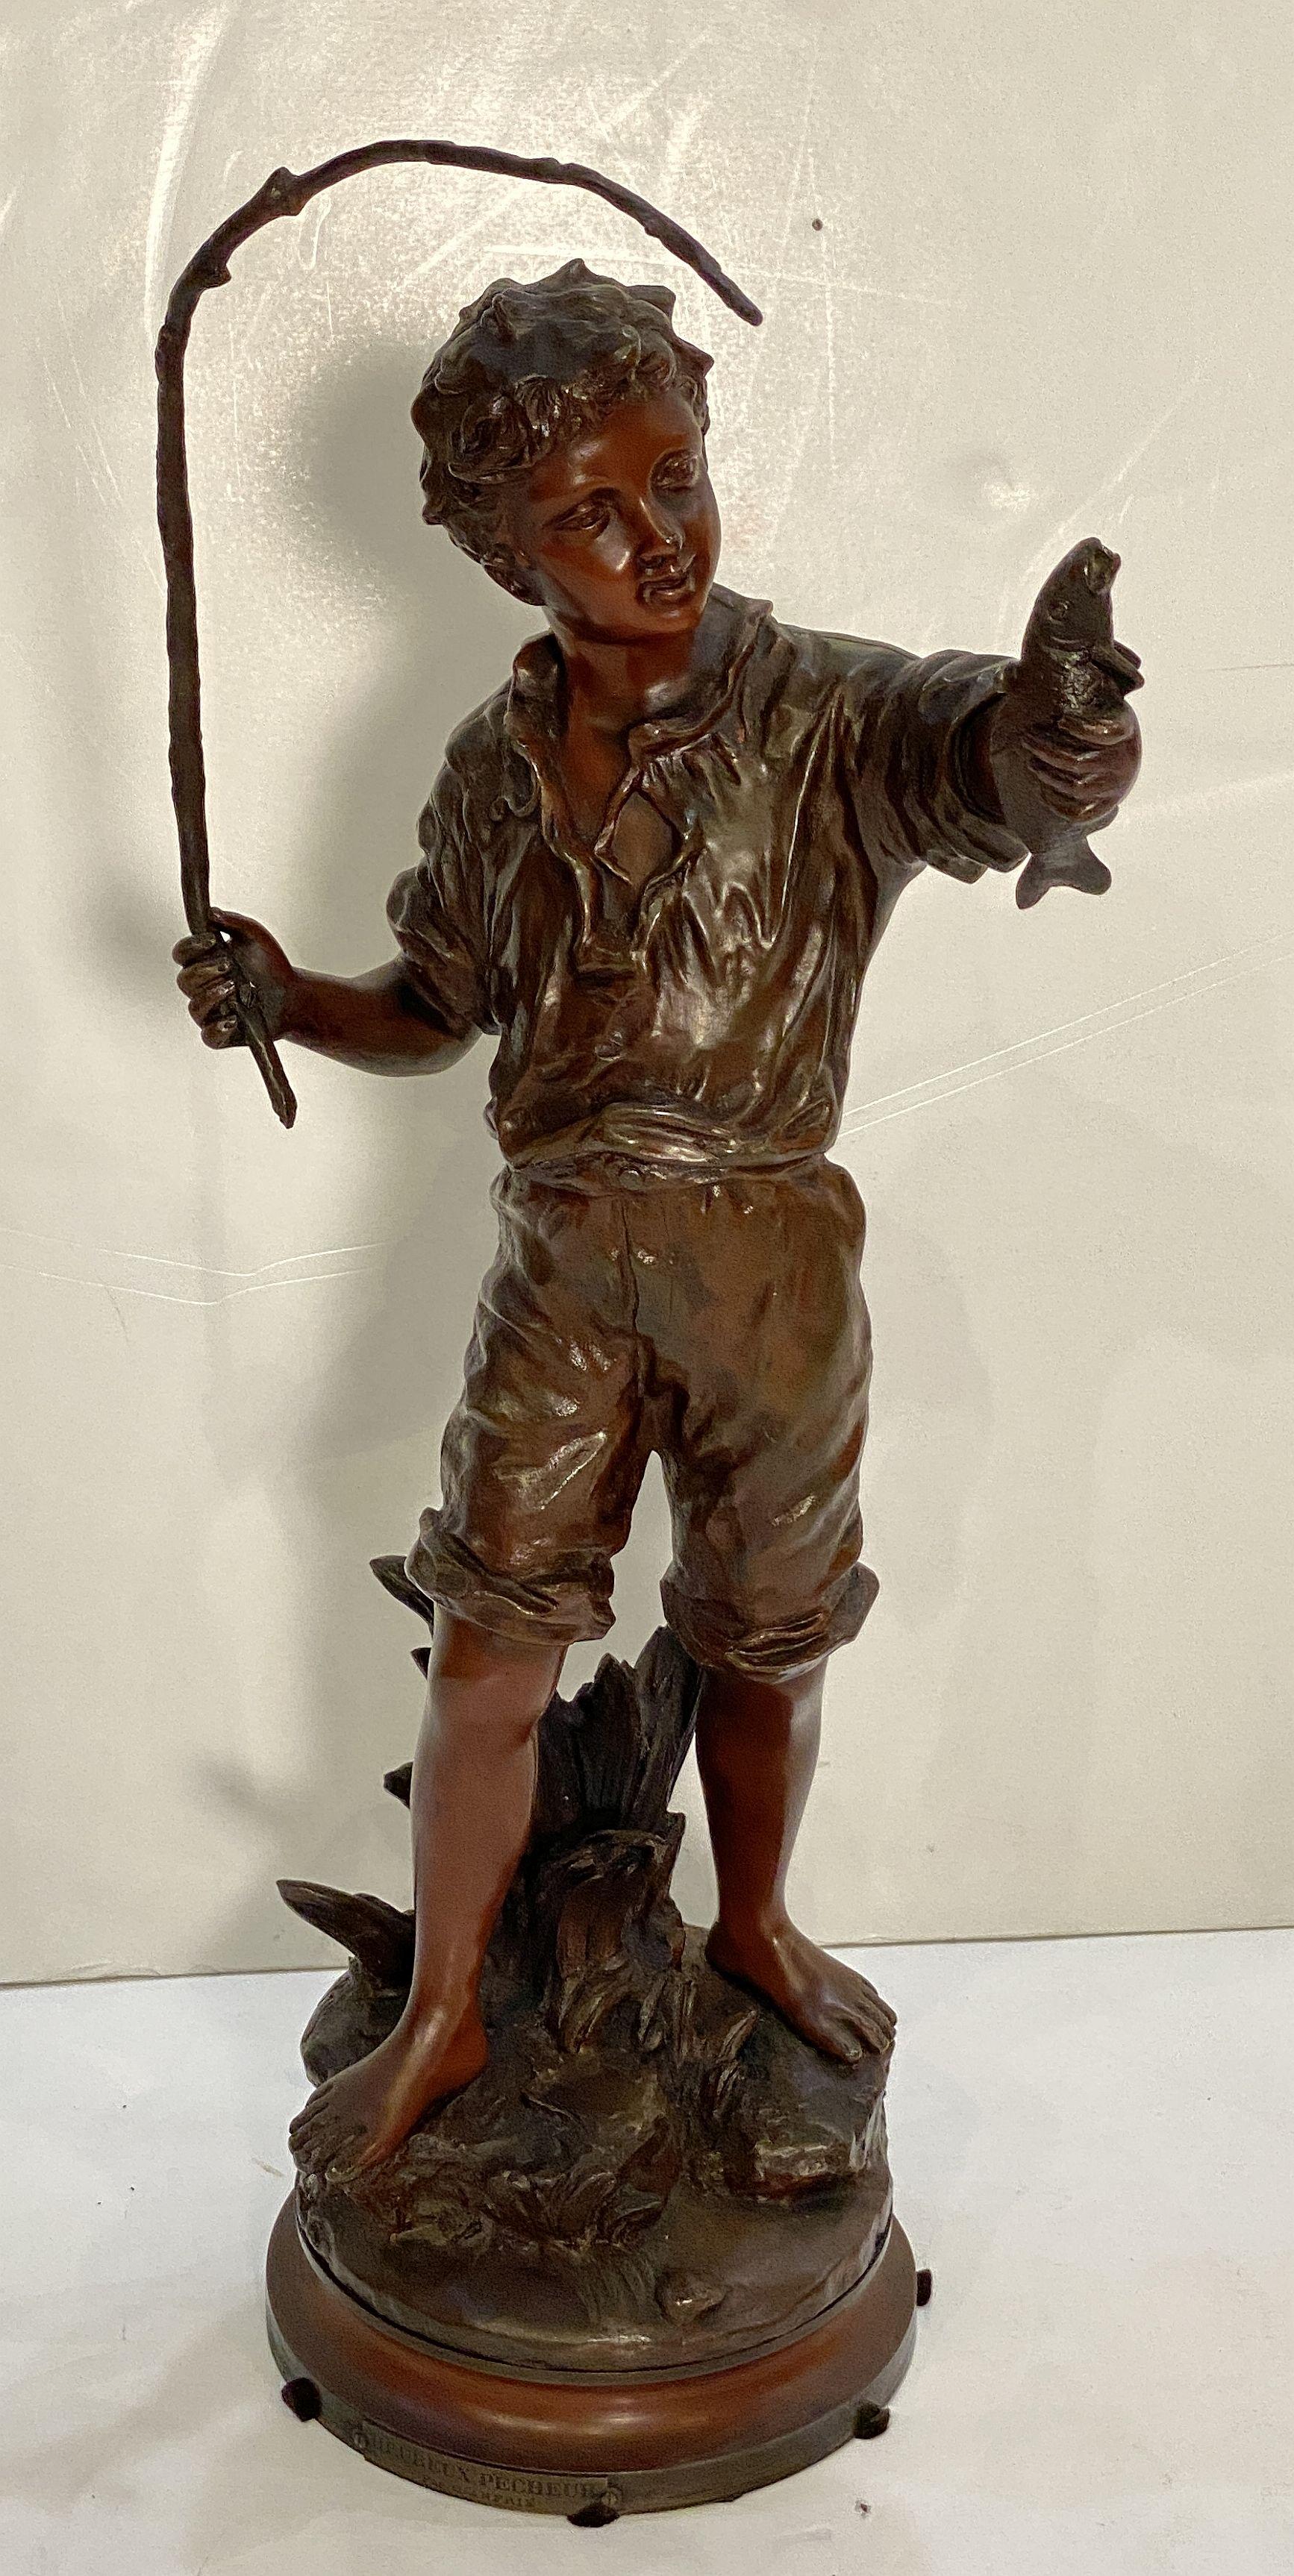 20th Century Heureux Pêcheur or Happy Fisherboy Bronze Sculptural Figure by Charles Anfrie 